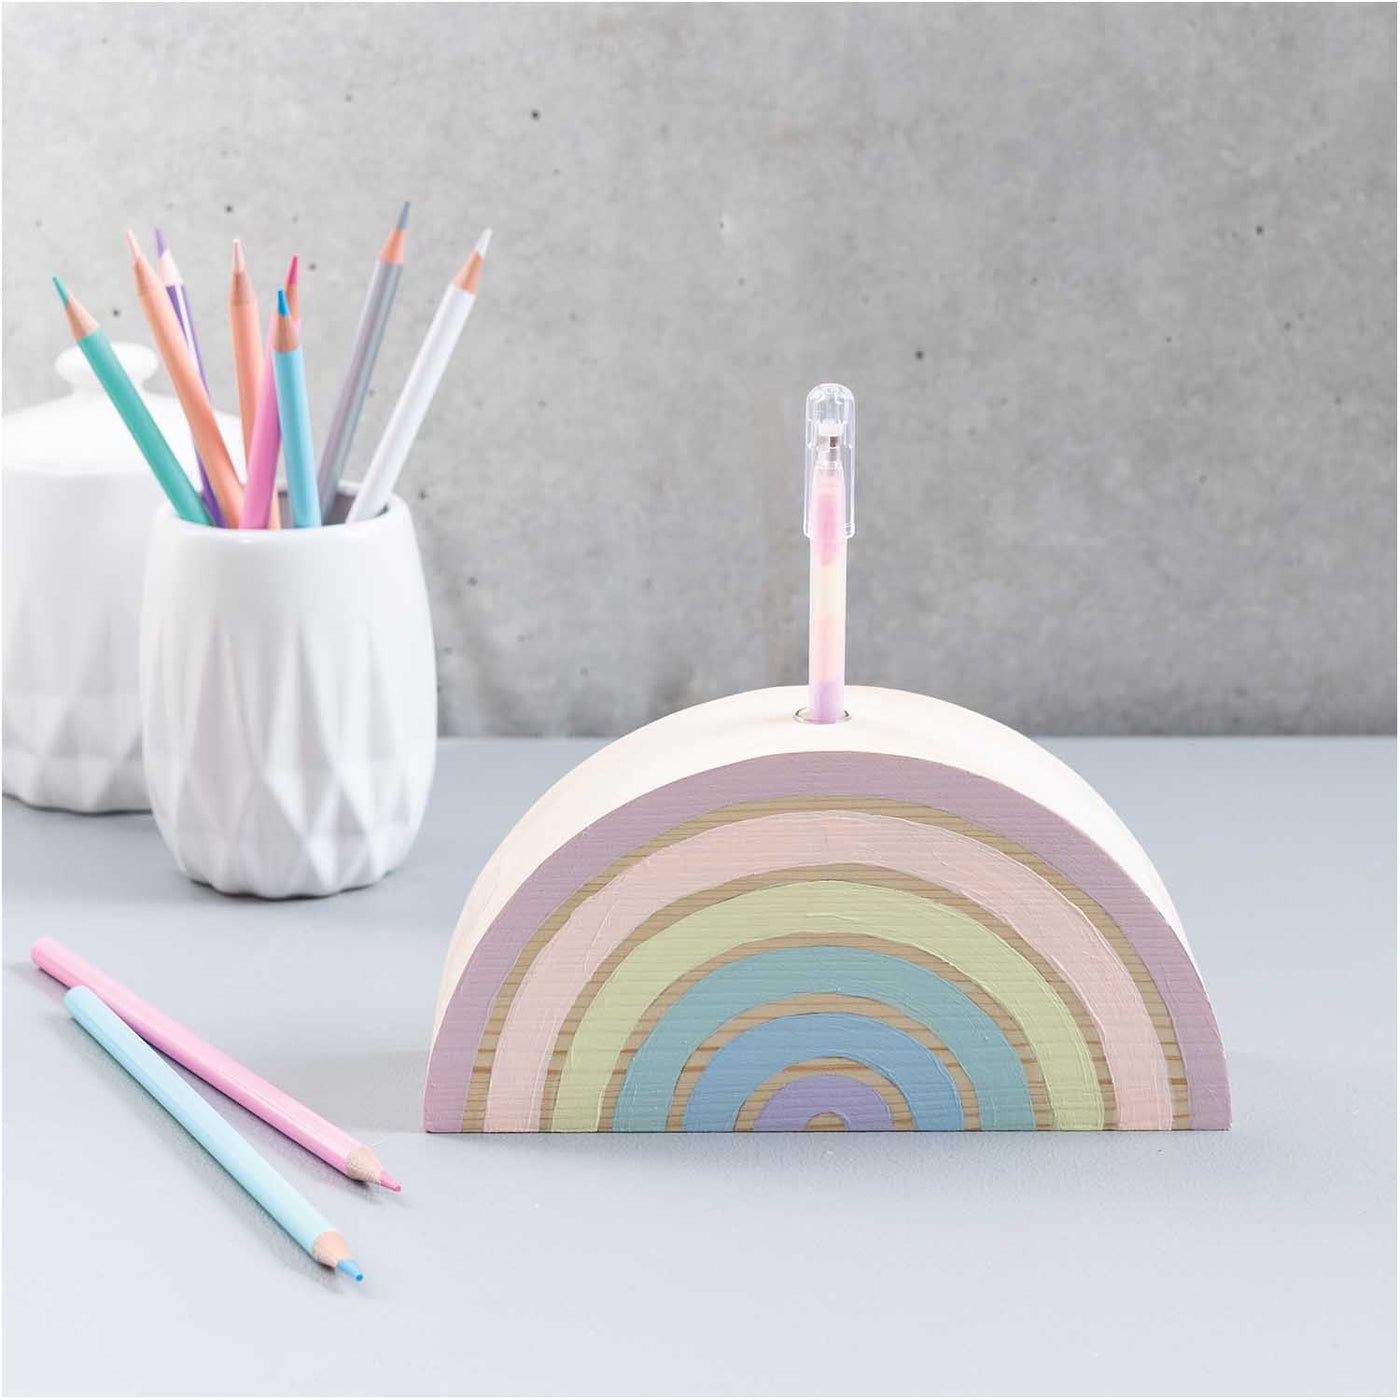 Wooden Rainbow with Small Glass Vase for Craft - 18cm